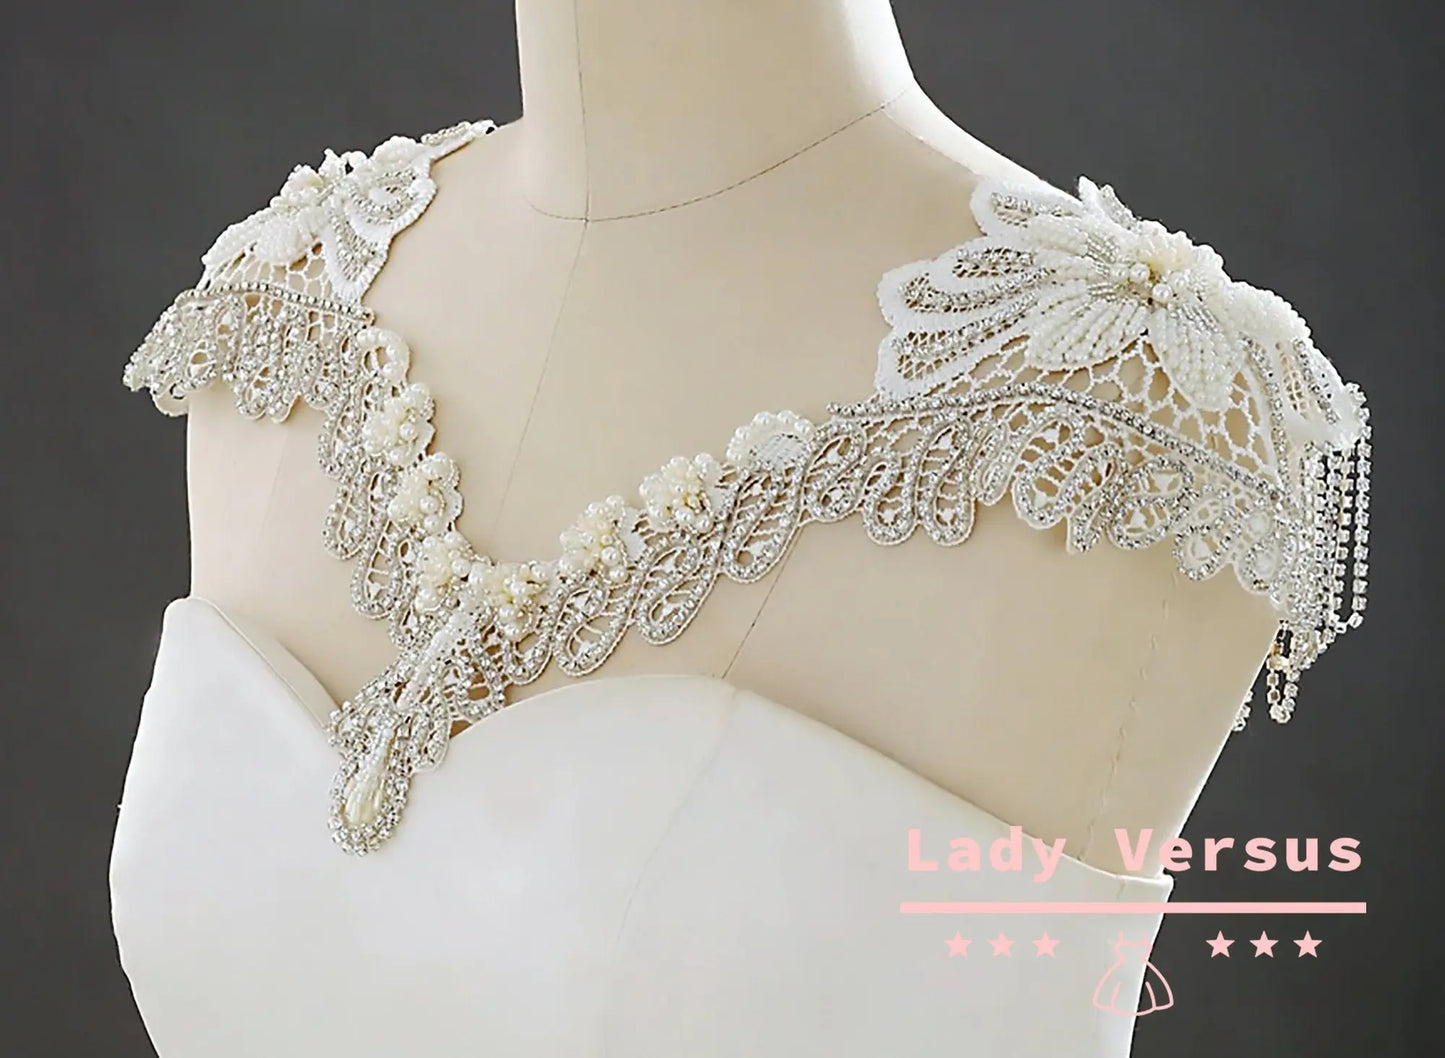 Jewelry Necklaces Shoulder, Lace and Pearl Shoulder, Wedding Shoulder, Wedding Shoulder Jewelry, Bridal Shoulder Necklace